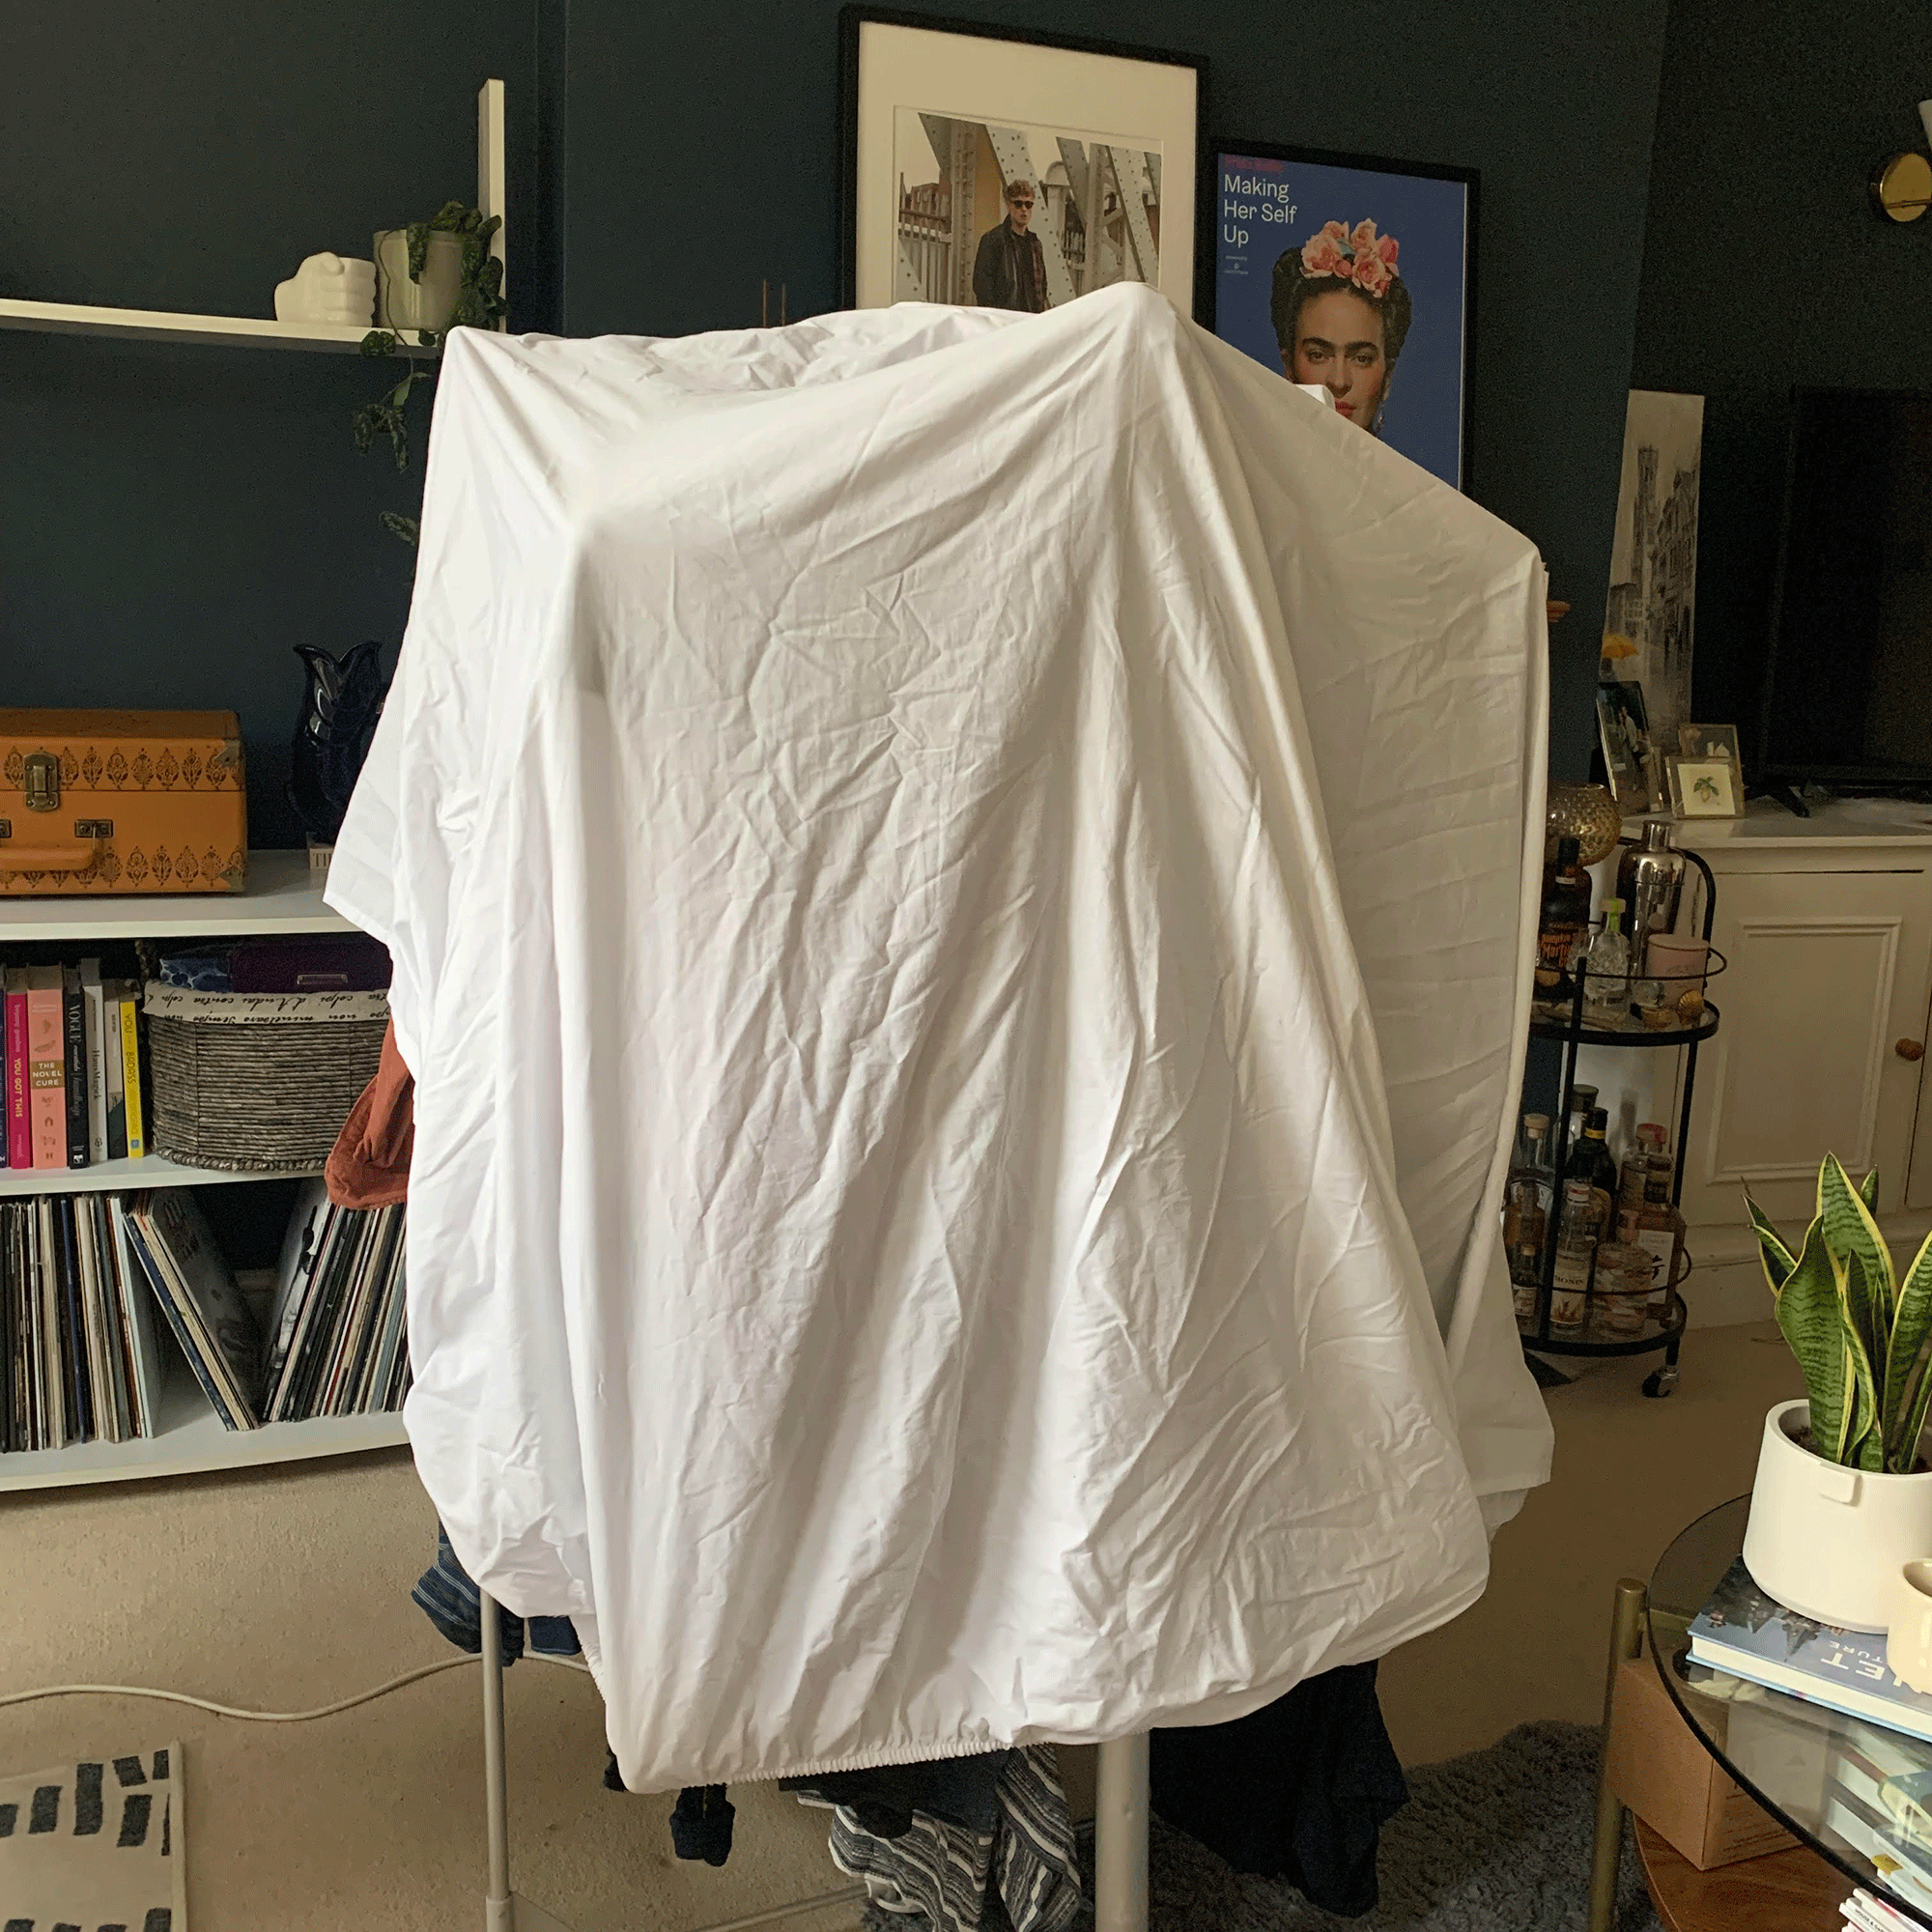 Fitted sheet over a heated airer